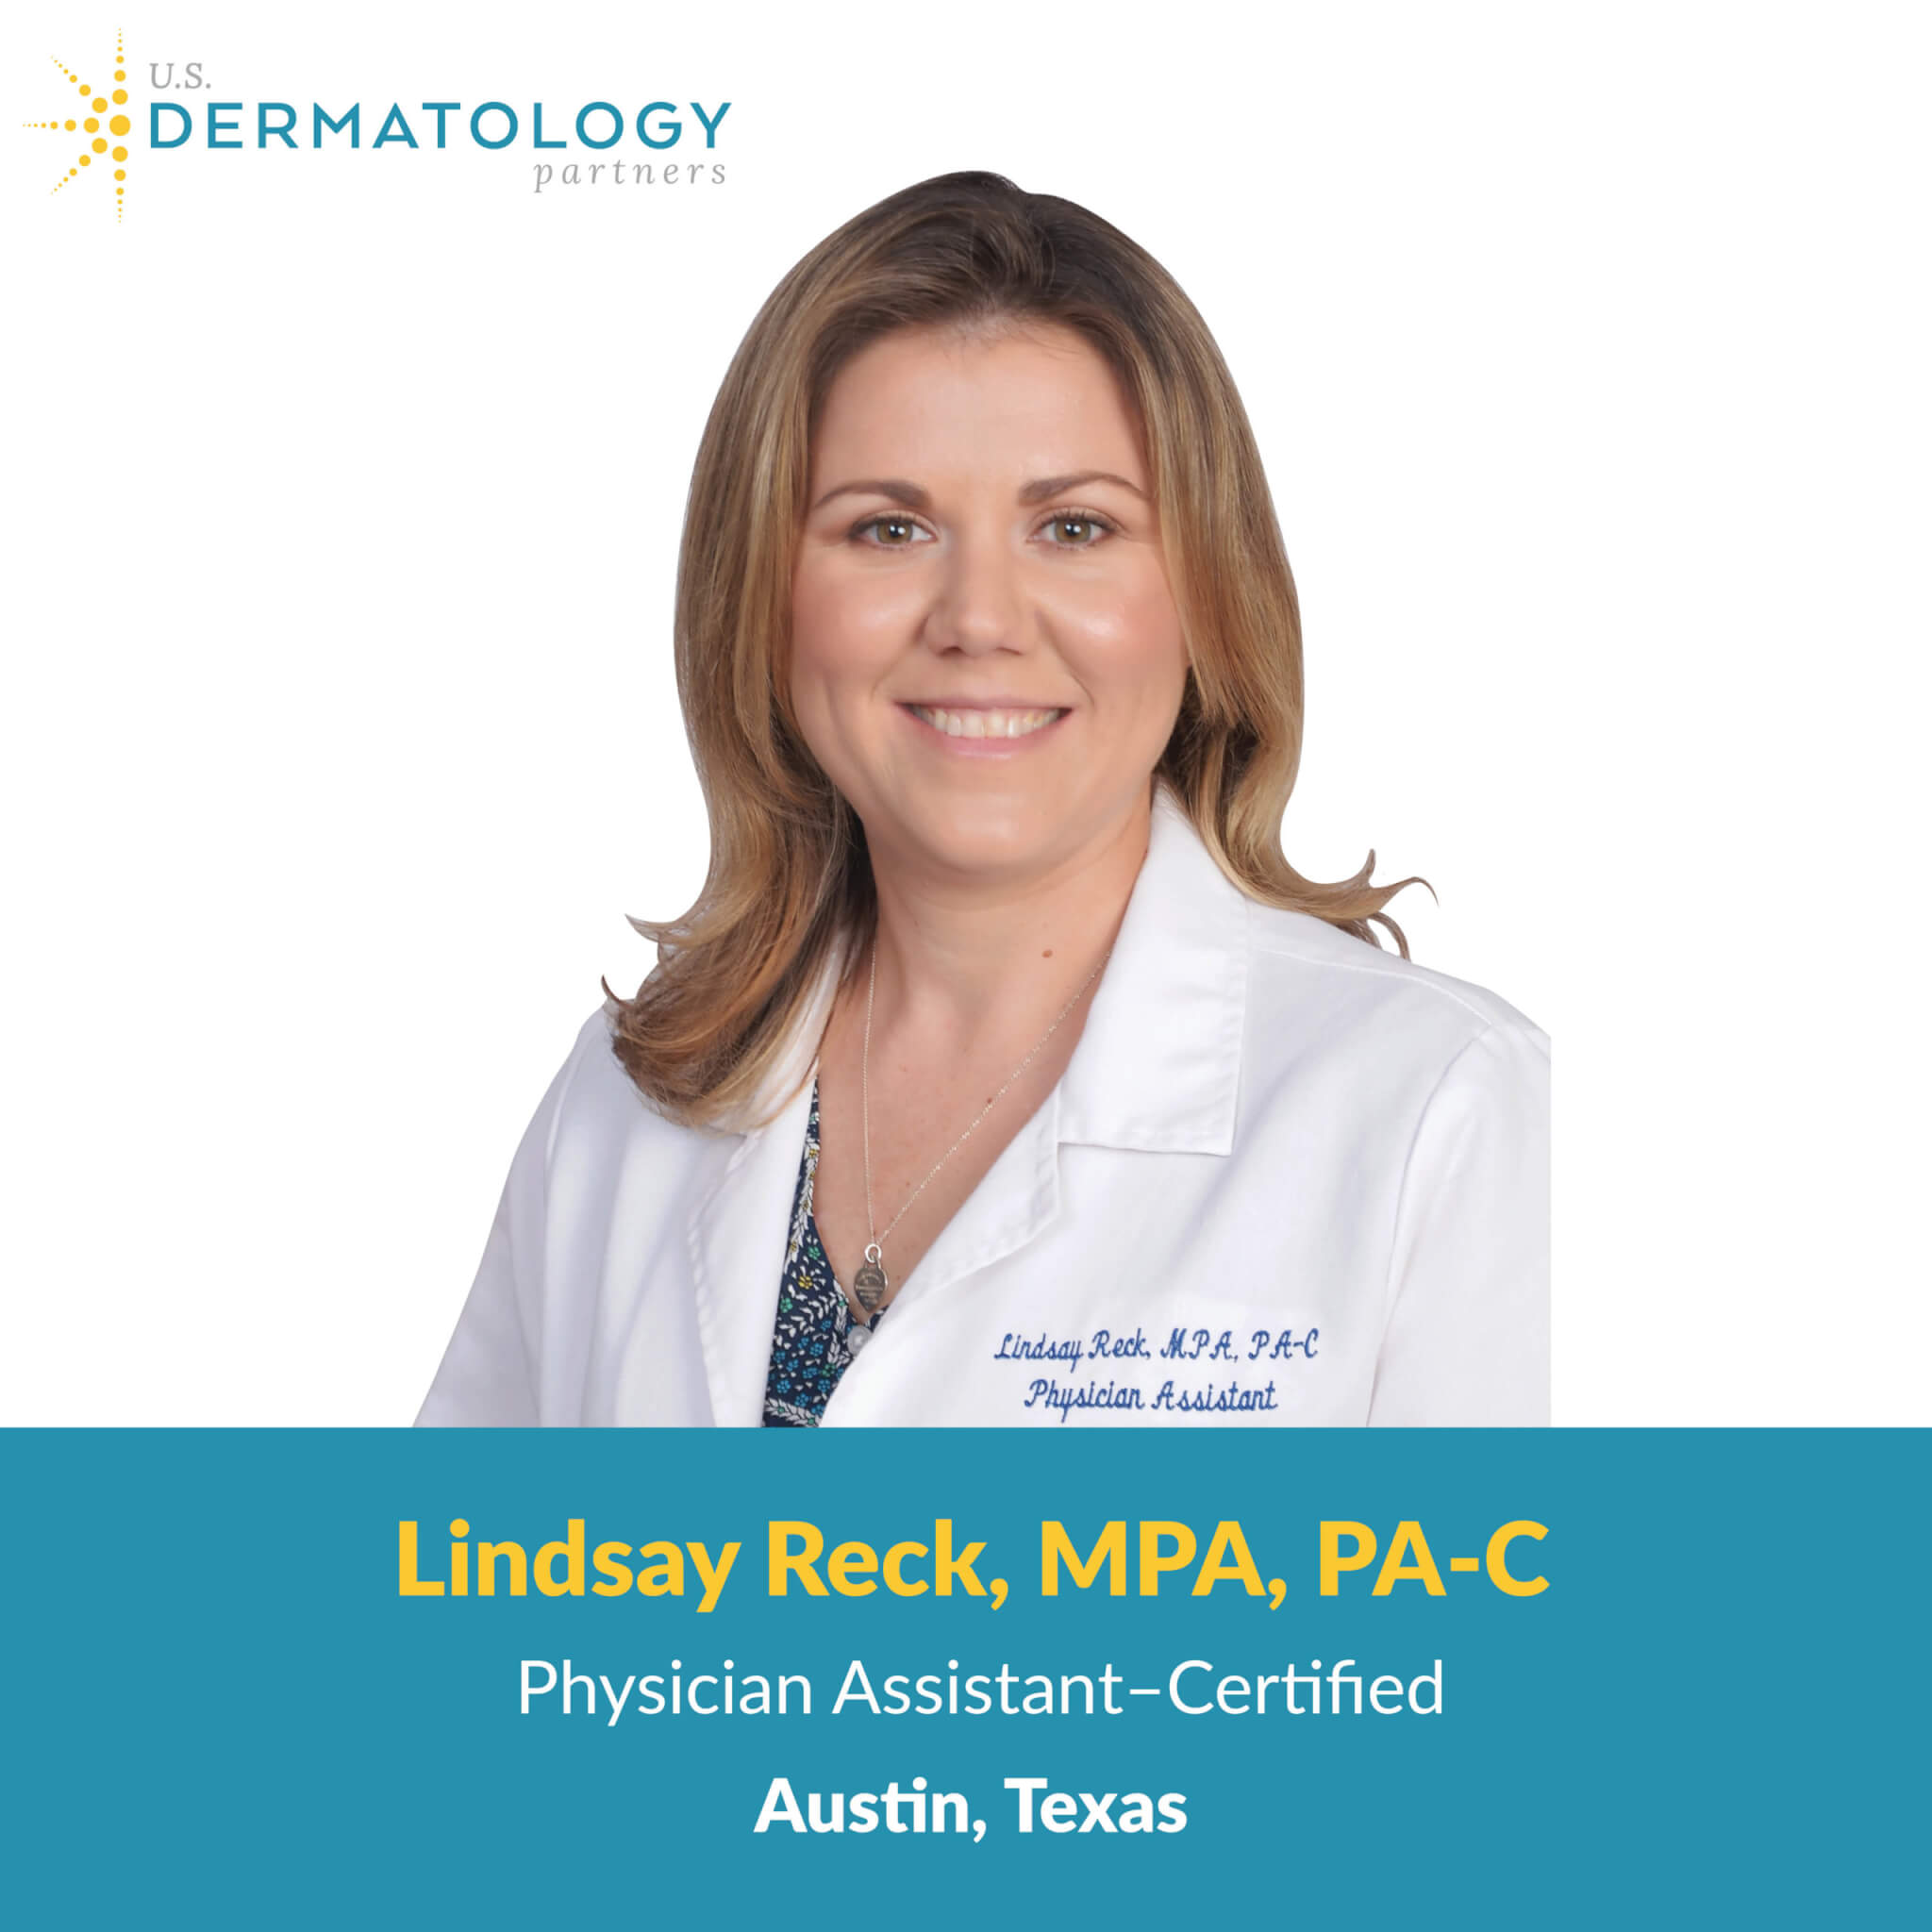 Lindsay Reck is a Certified Physician Assistant at U.S. Dermatology Partners Spicewood Springs in Austin, Texas. Now accepting new patients!